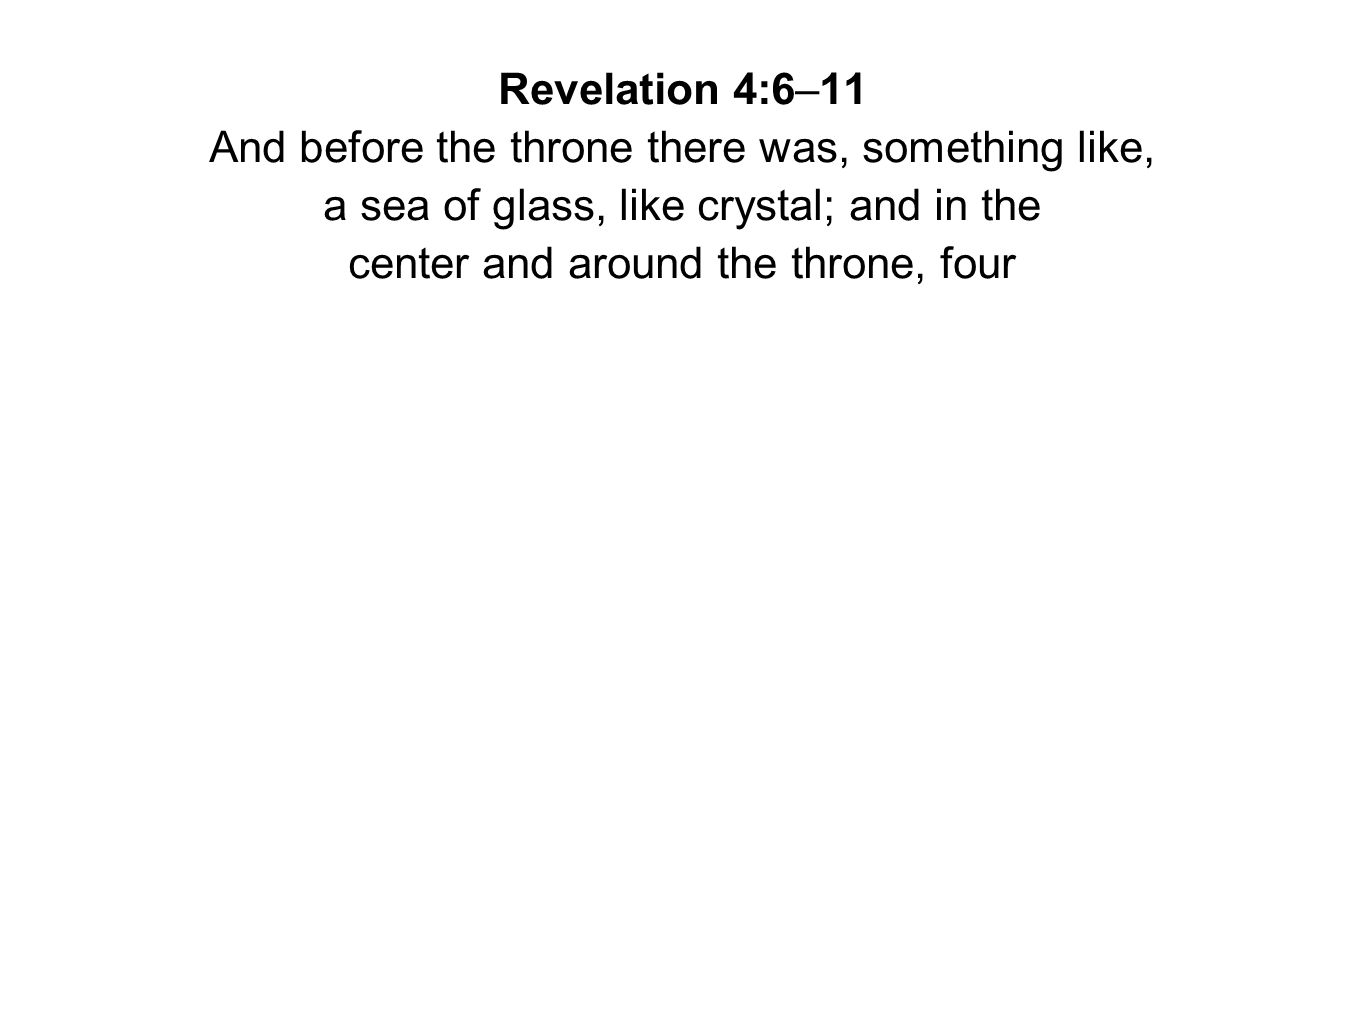 Revelation 4:6–11 And before the throne there was, something like, a sea of glass, like crystal; and in the center and around the throne, four